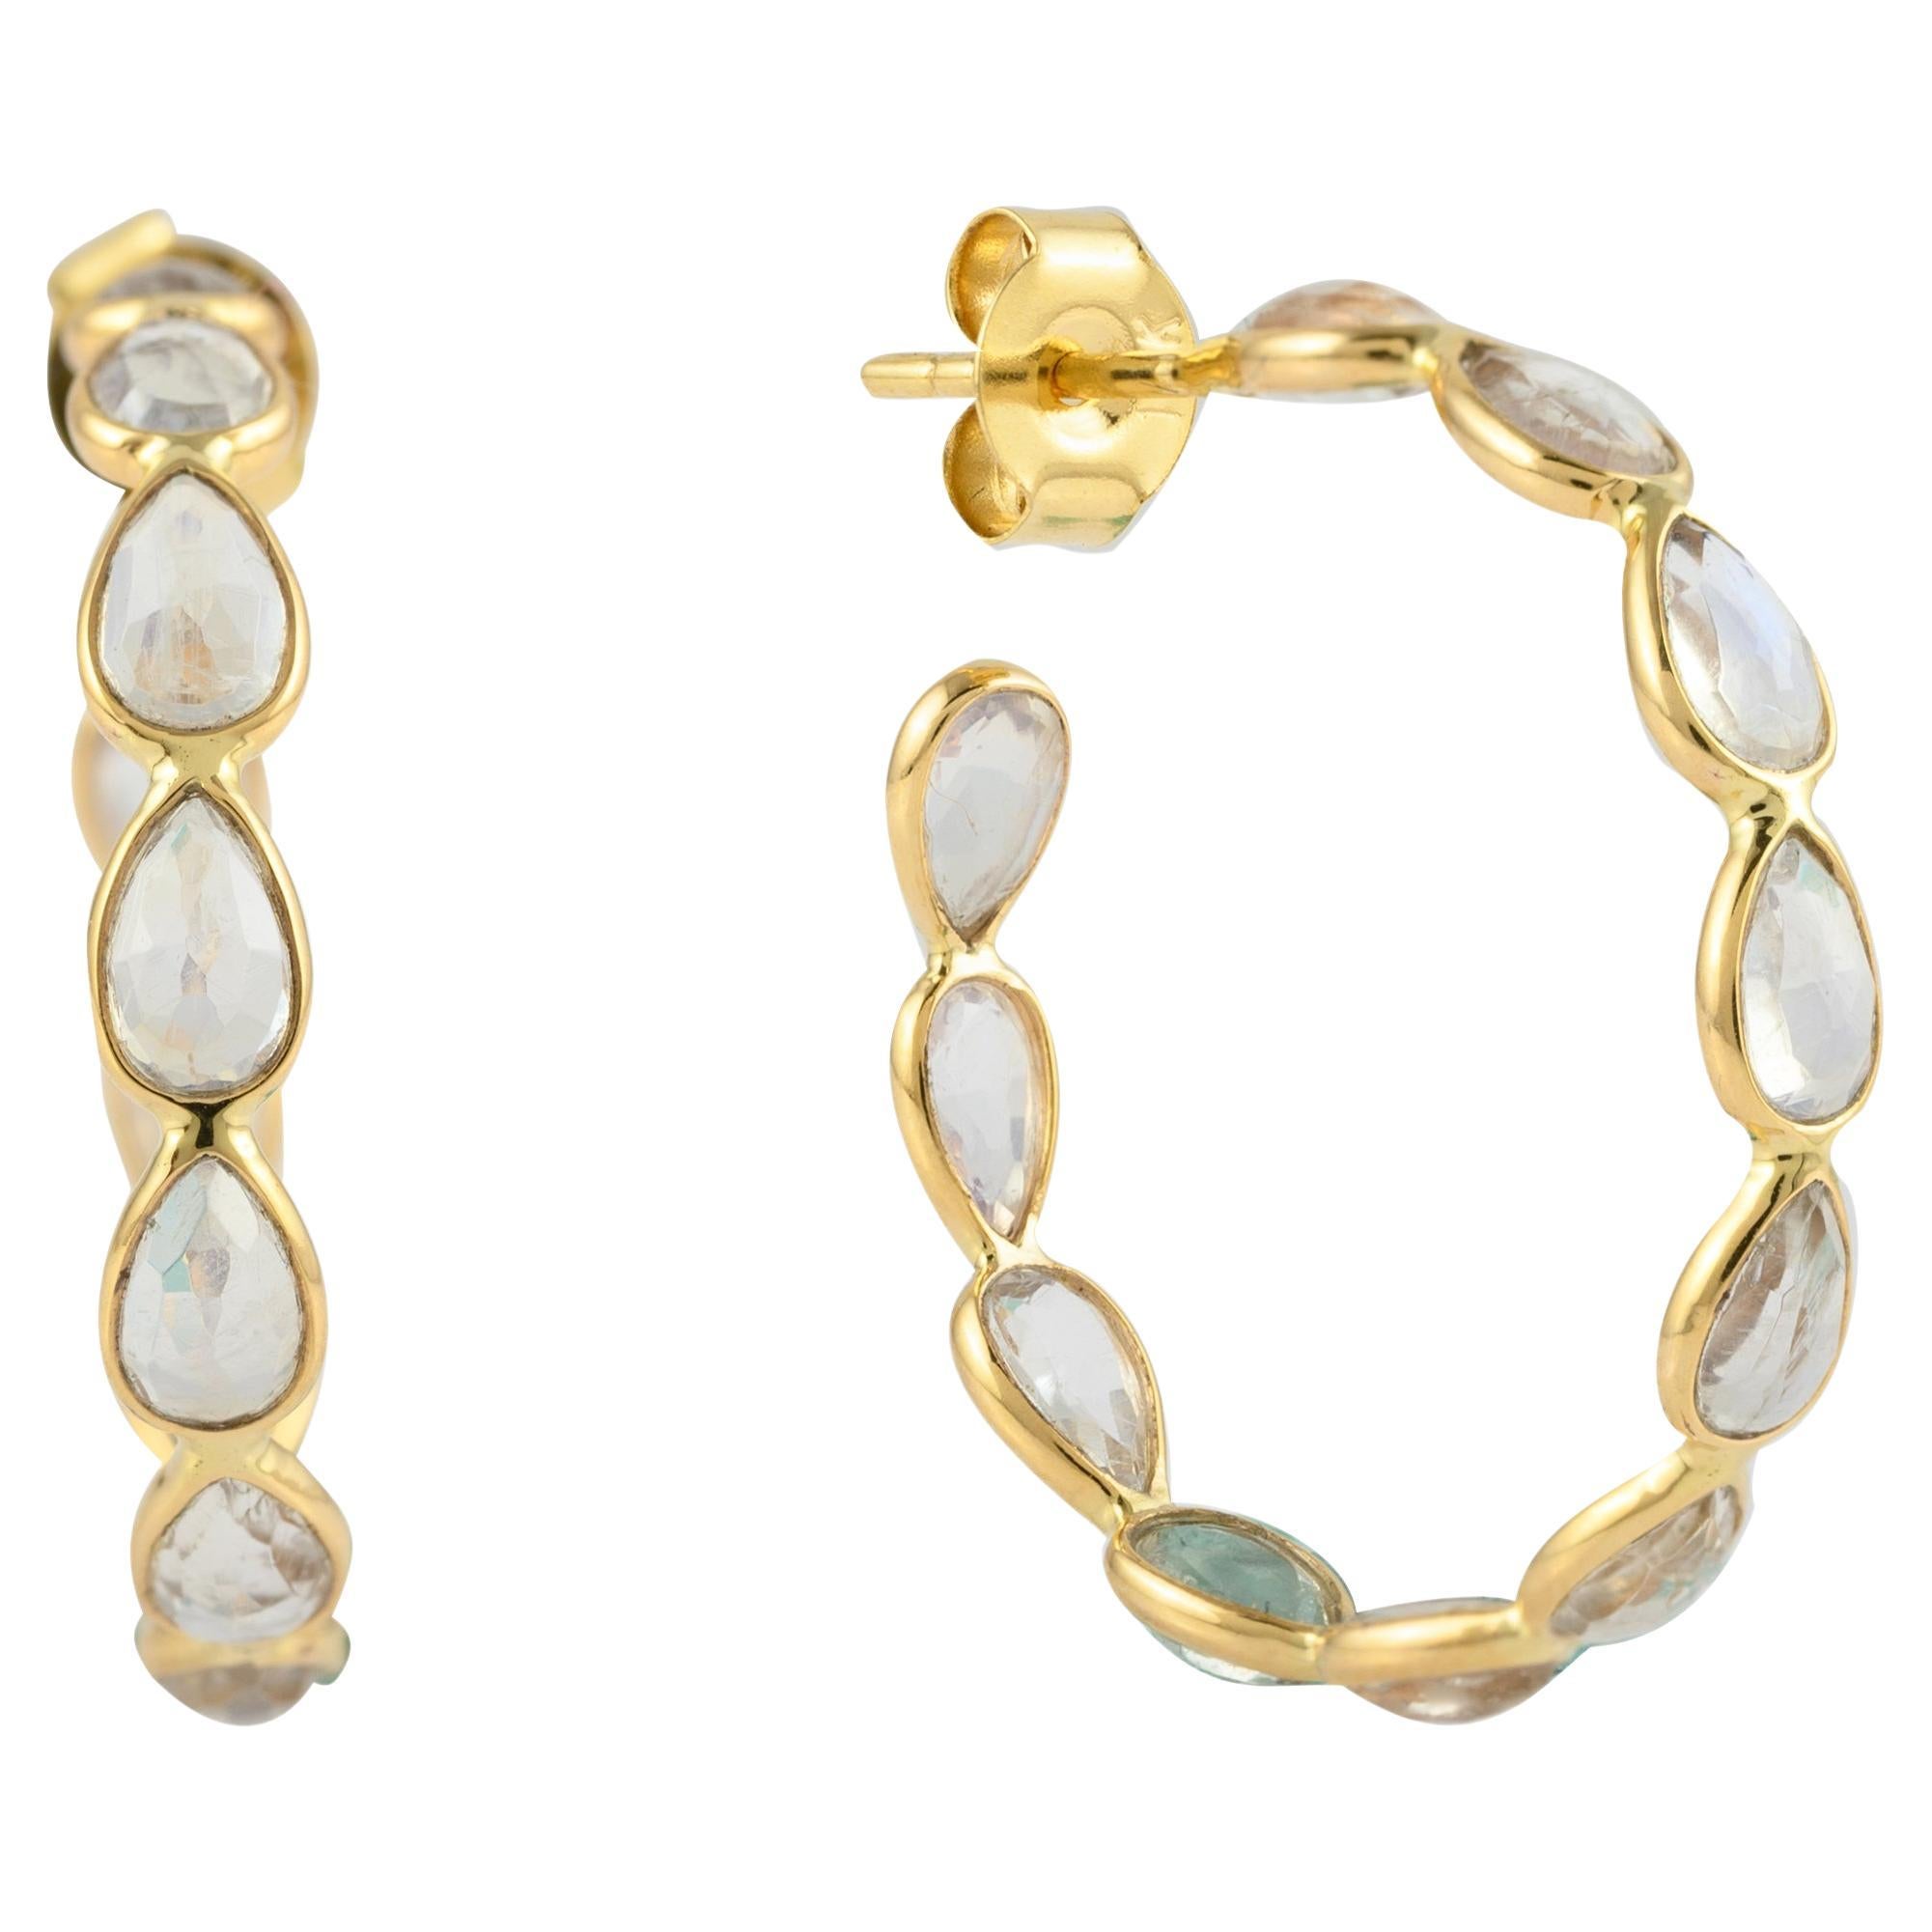 Natural Rainbow Moonstone Hoop Earrings in Solid 14k Yellow Gold for Her